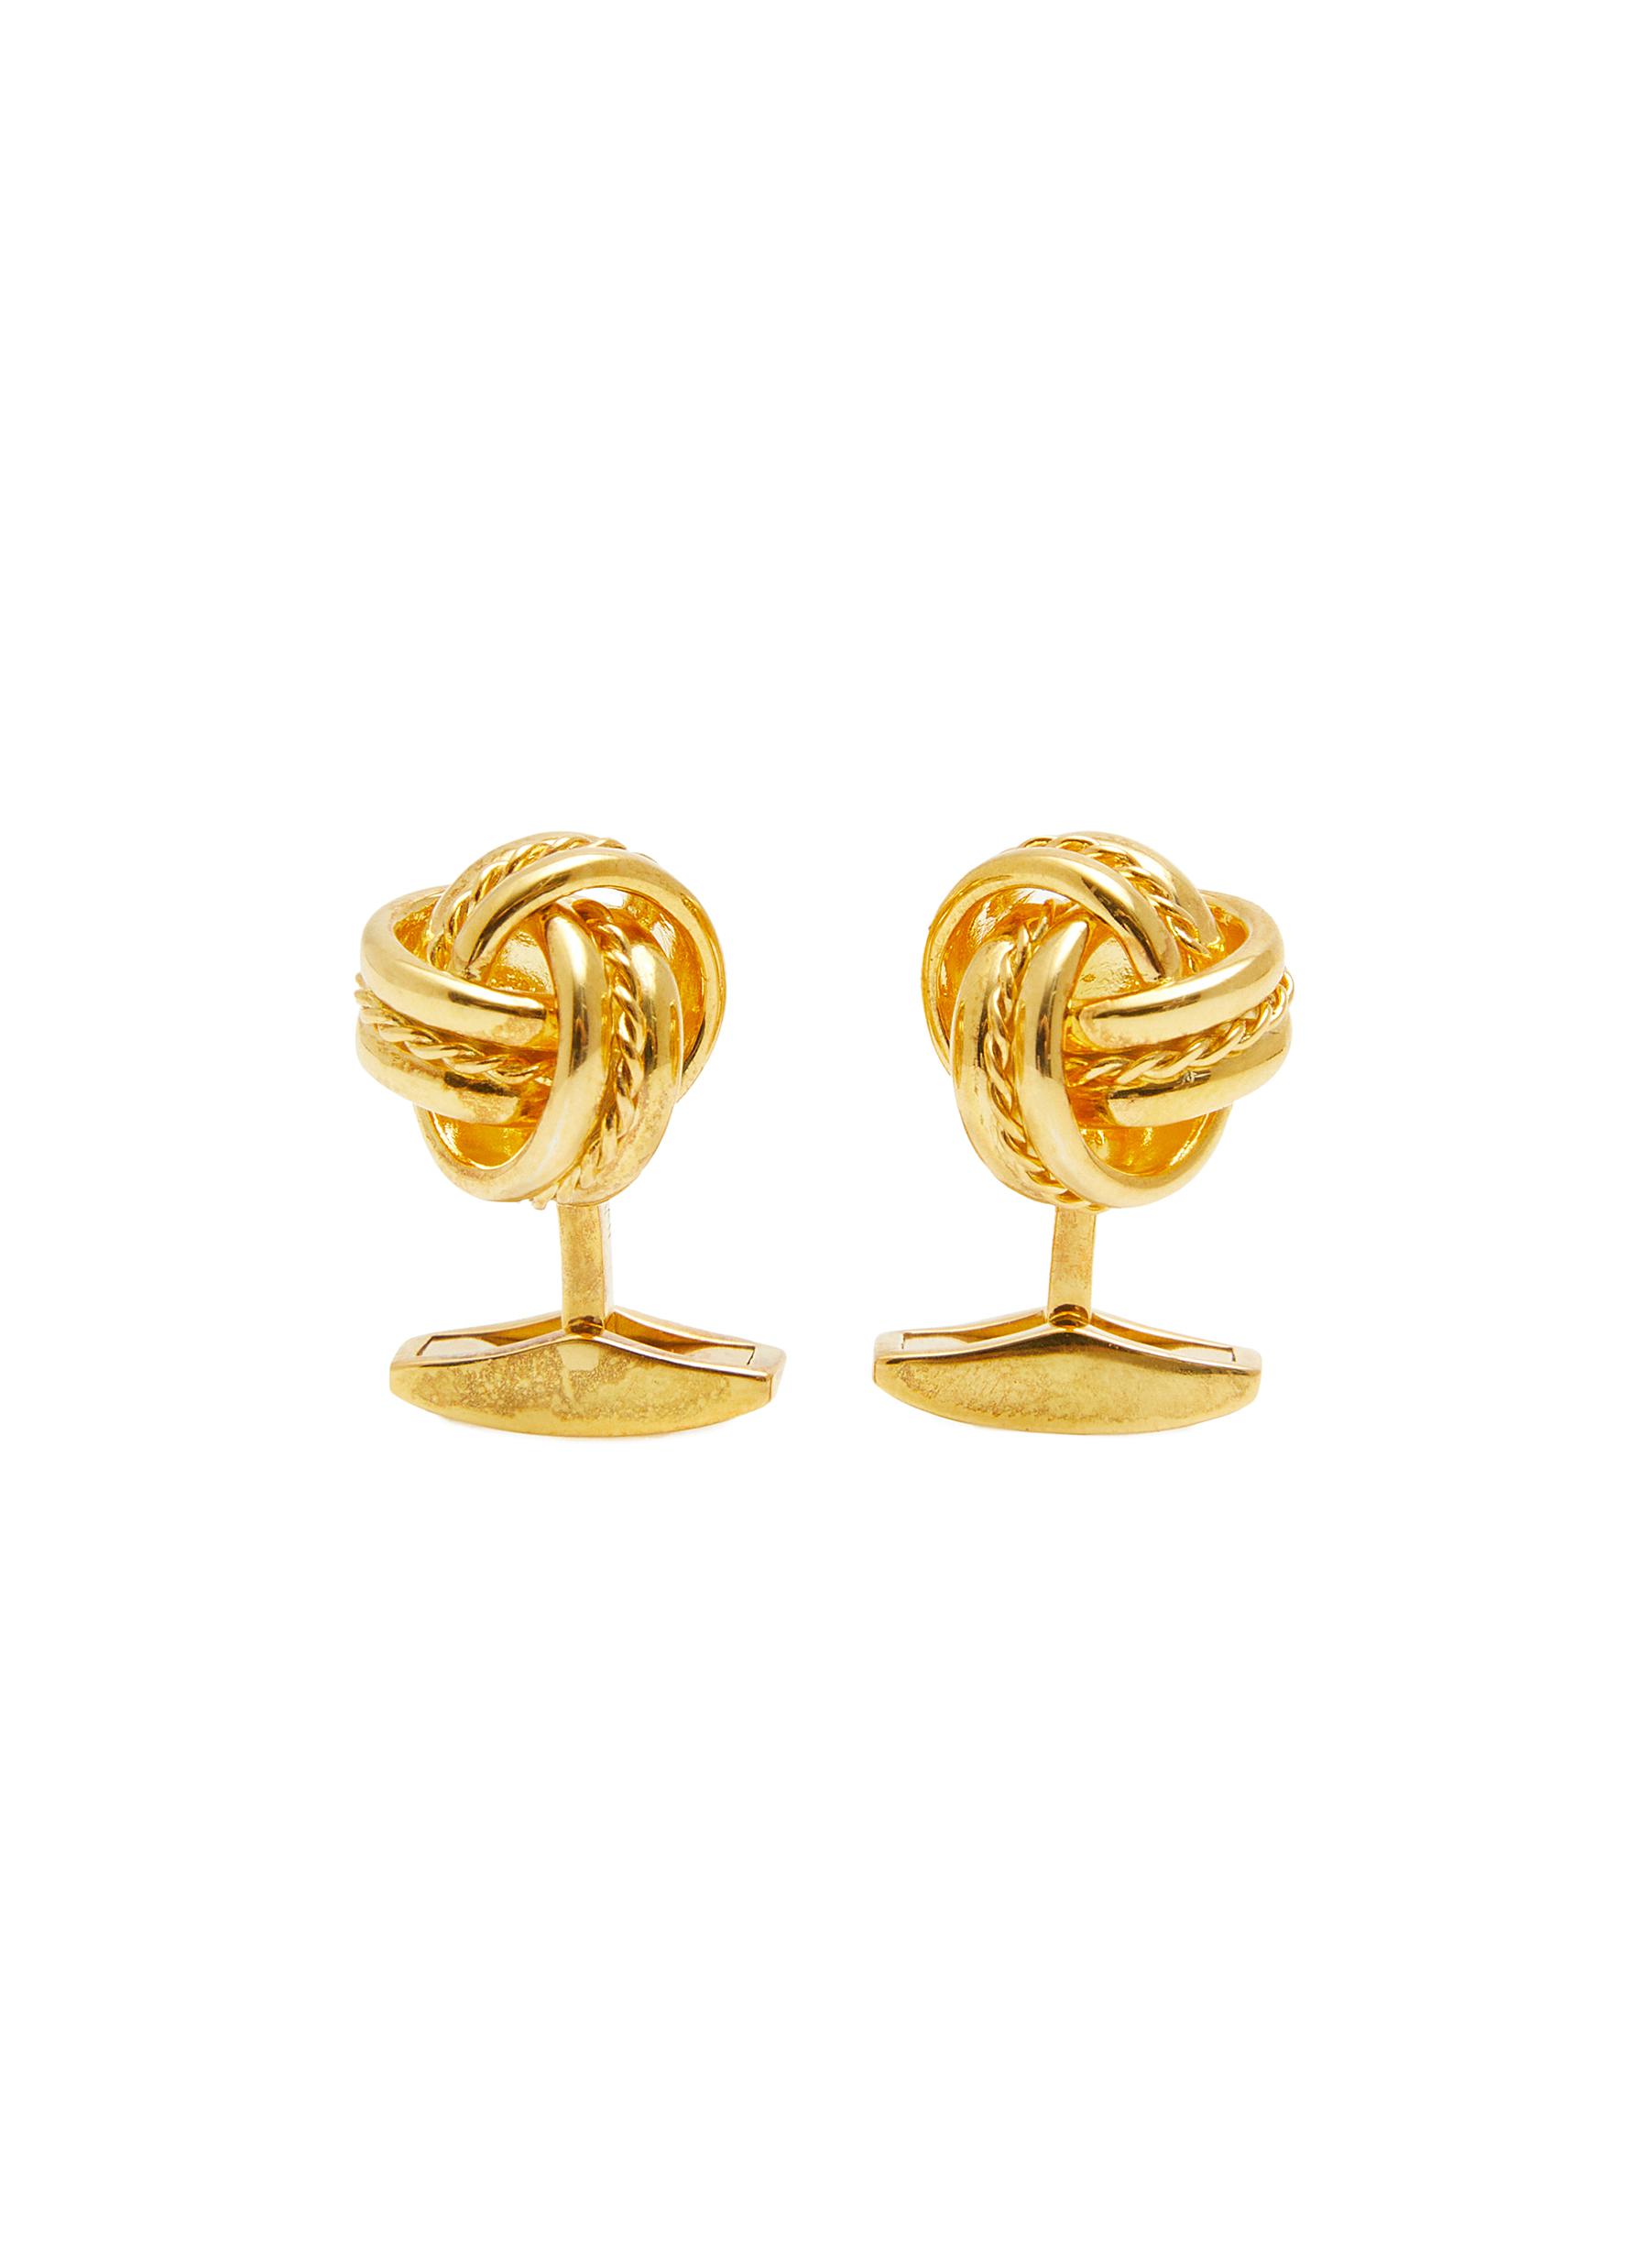 Gold Plated Sterling Silver Twisted Rope Cufflinks